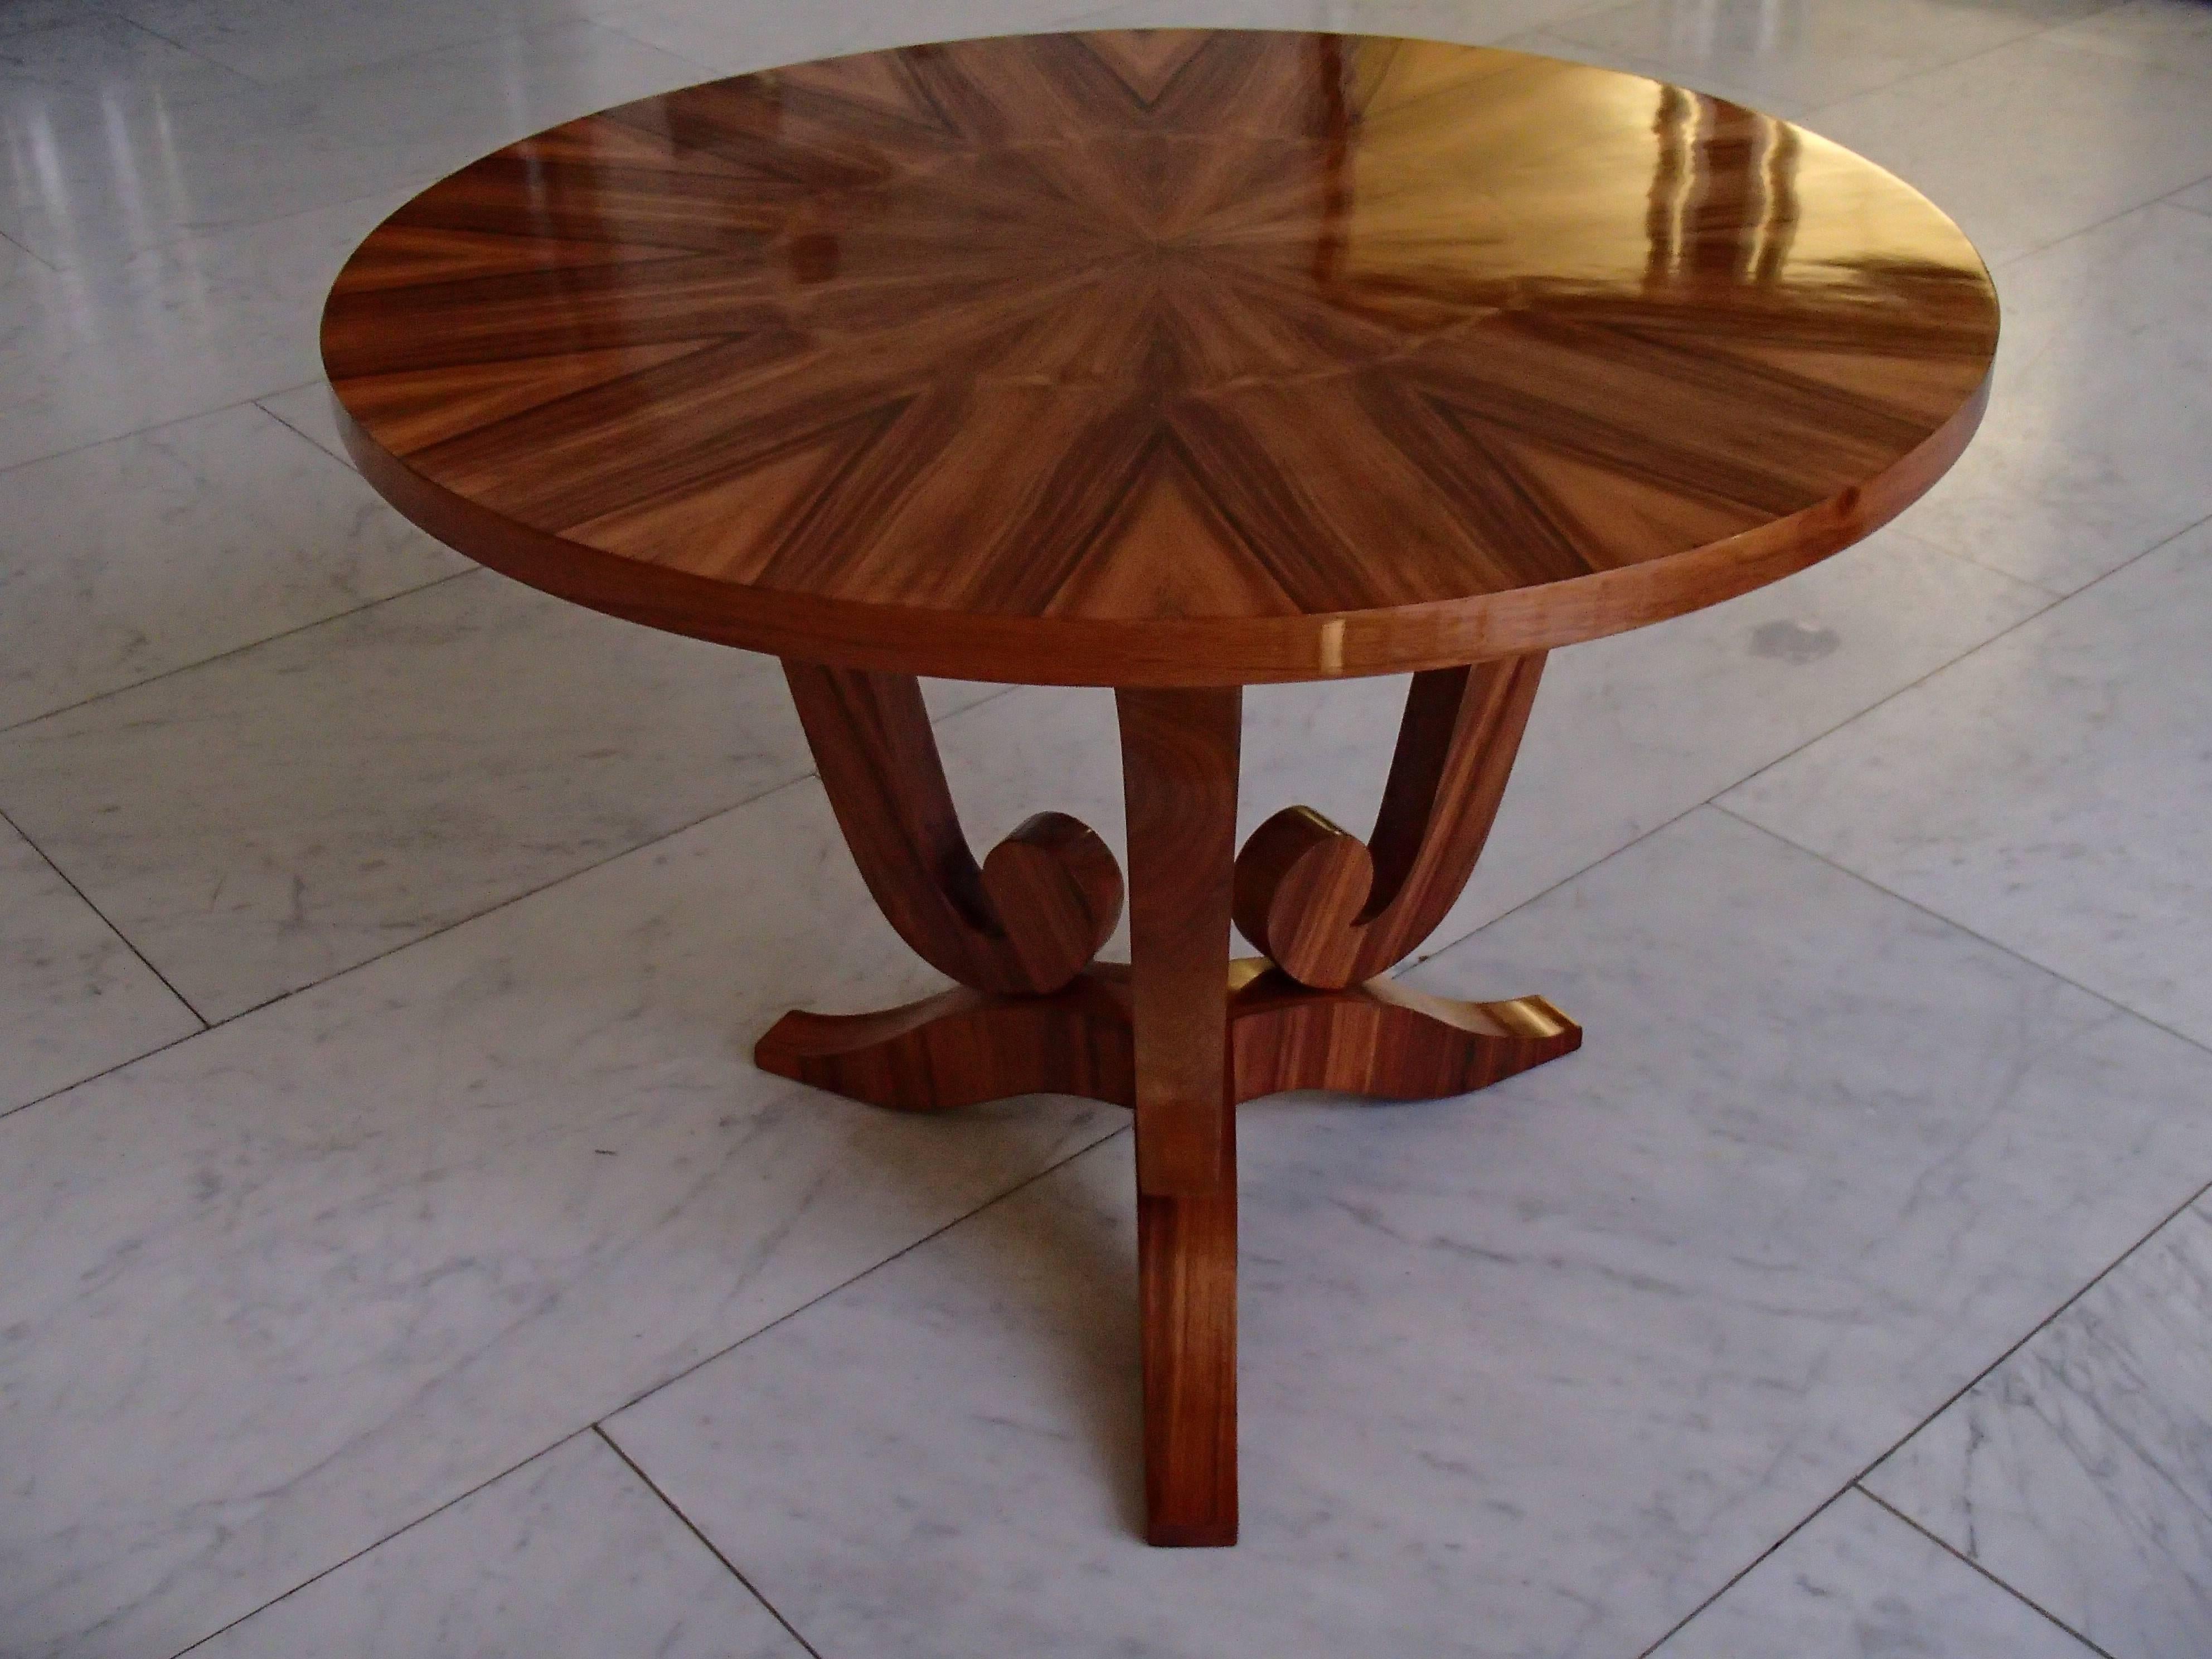 1930 very elegant light round walnut inlay 3 leg Art Deco coffee or side table completely restored with shellac.